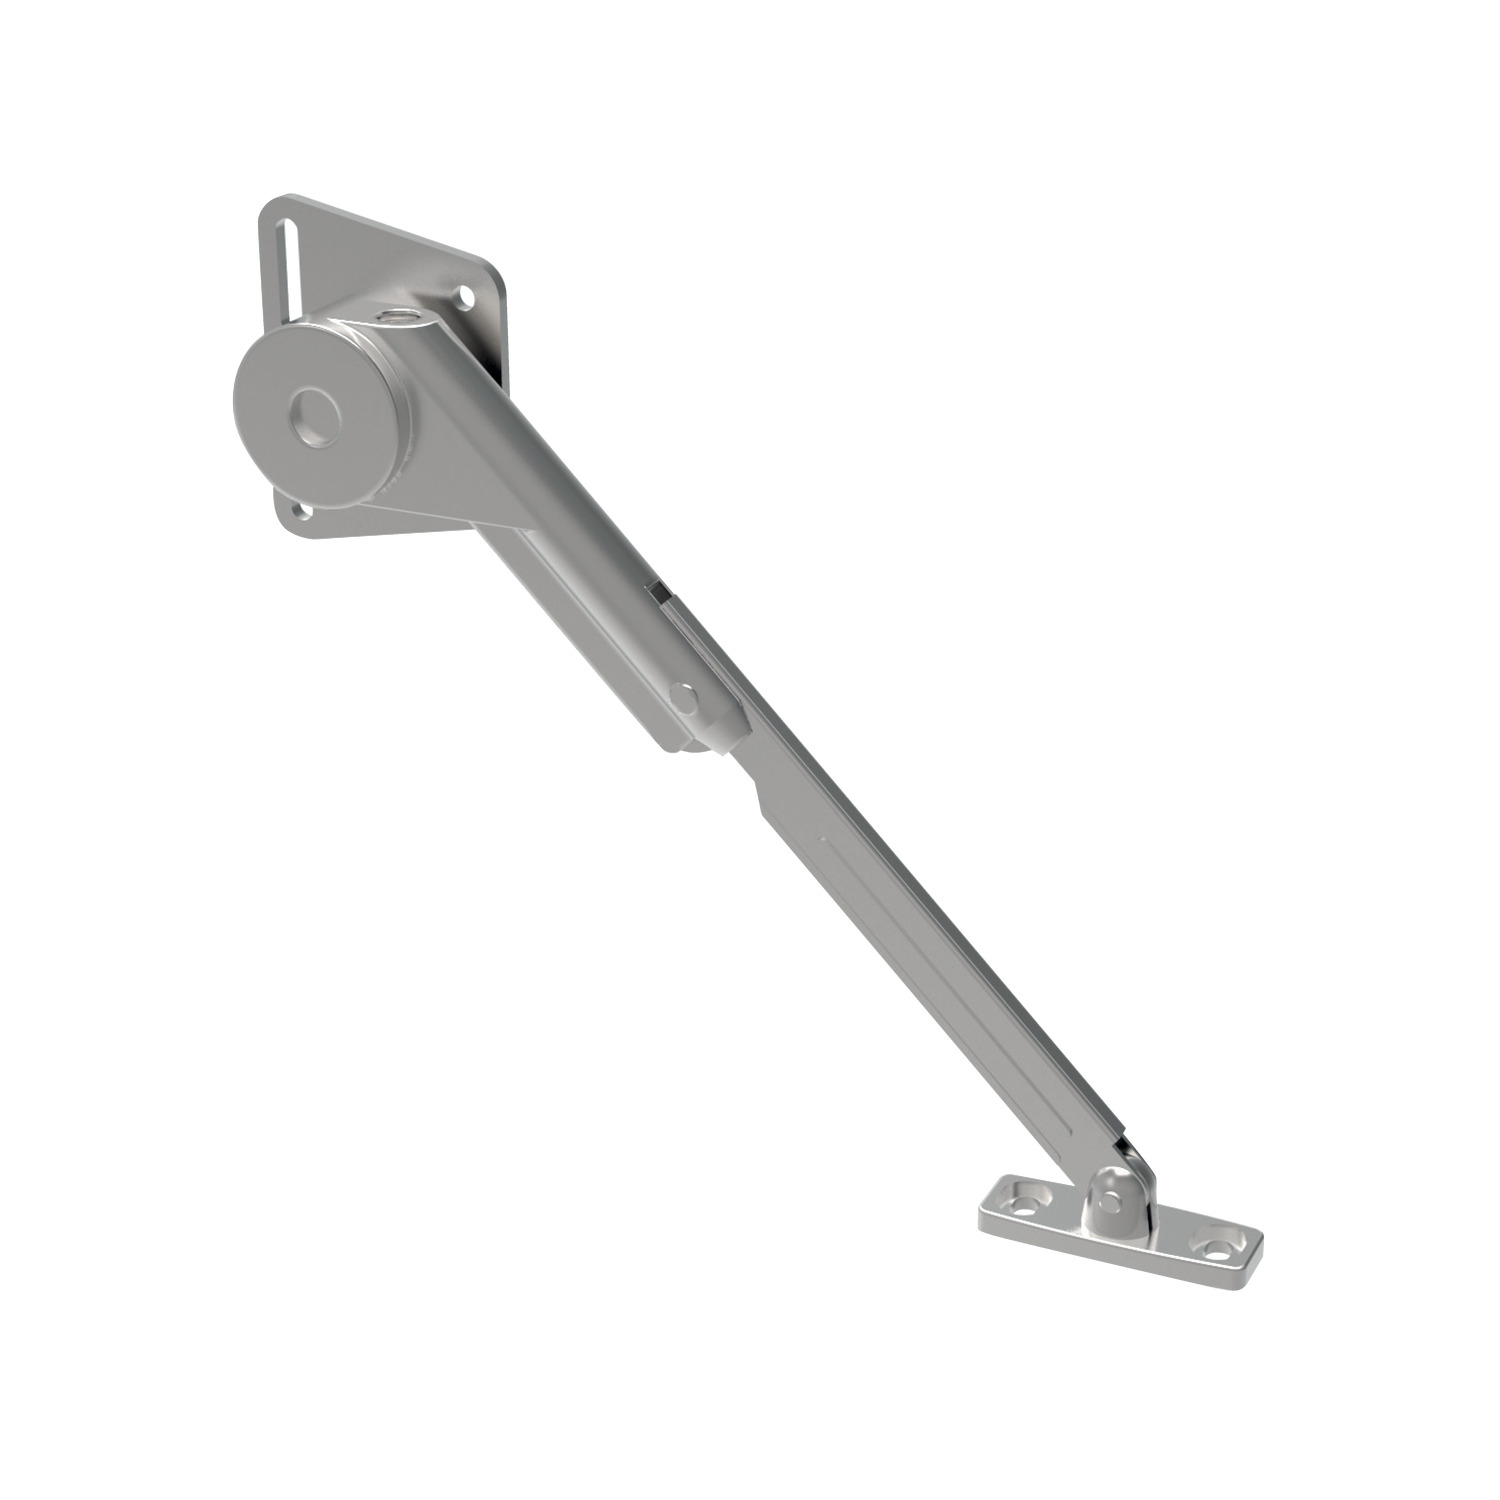 Soft-Closing Stays - for Downward Opening Lid Soft closing stays for downward opening lid. 90° opening angle. Made from zinc alloy or steel.